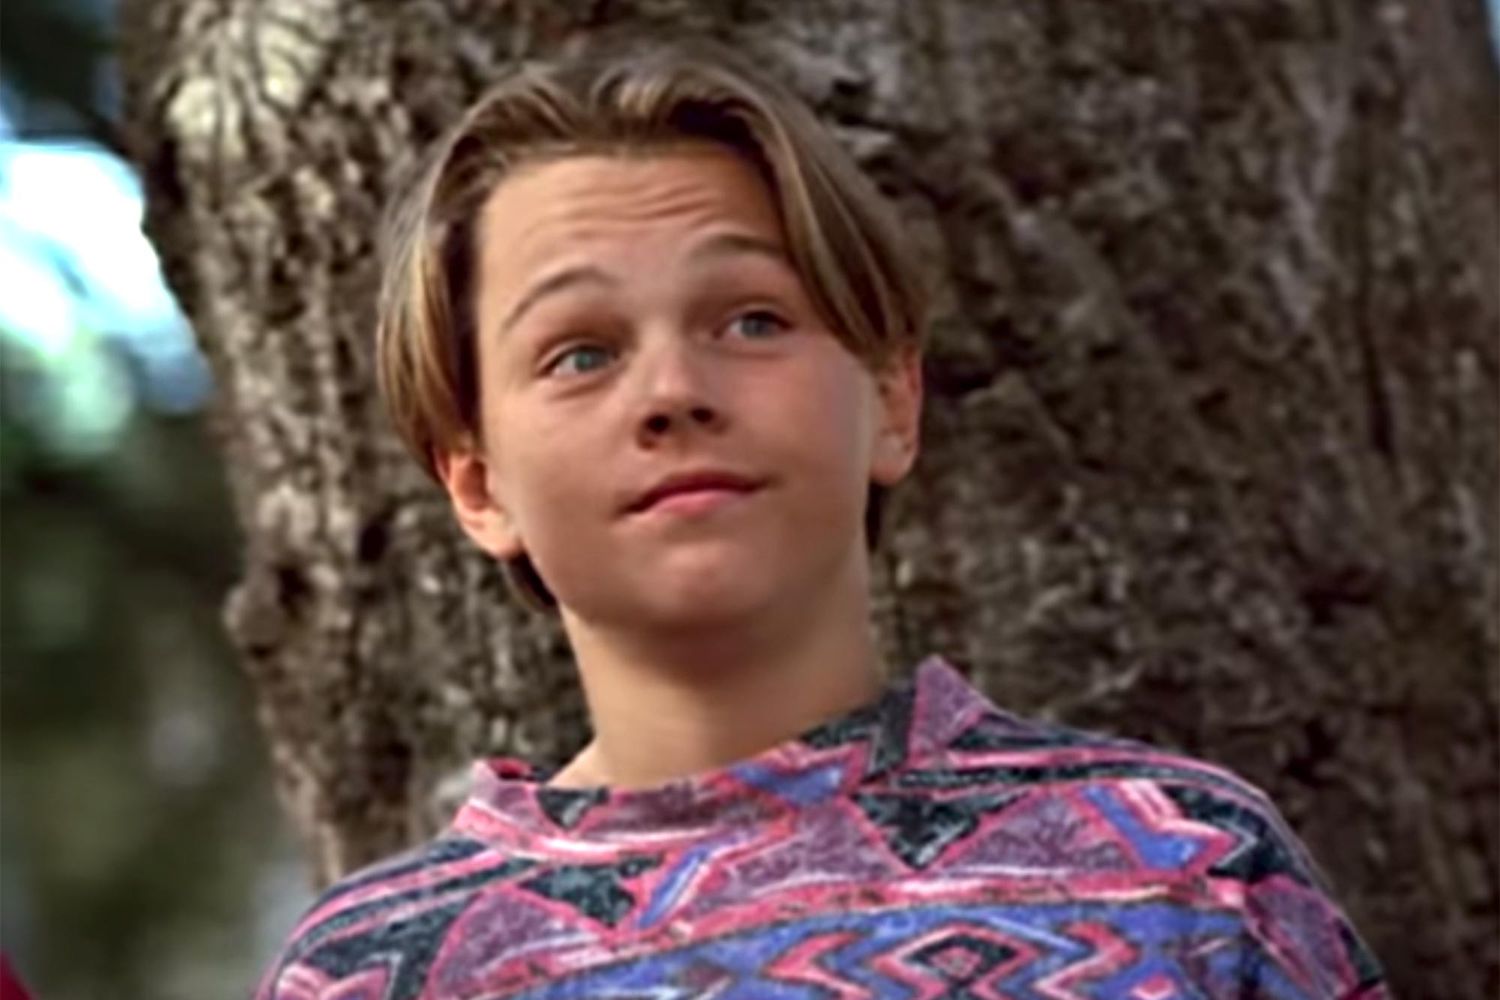 28. Critters 3 (1991)